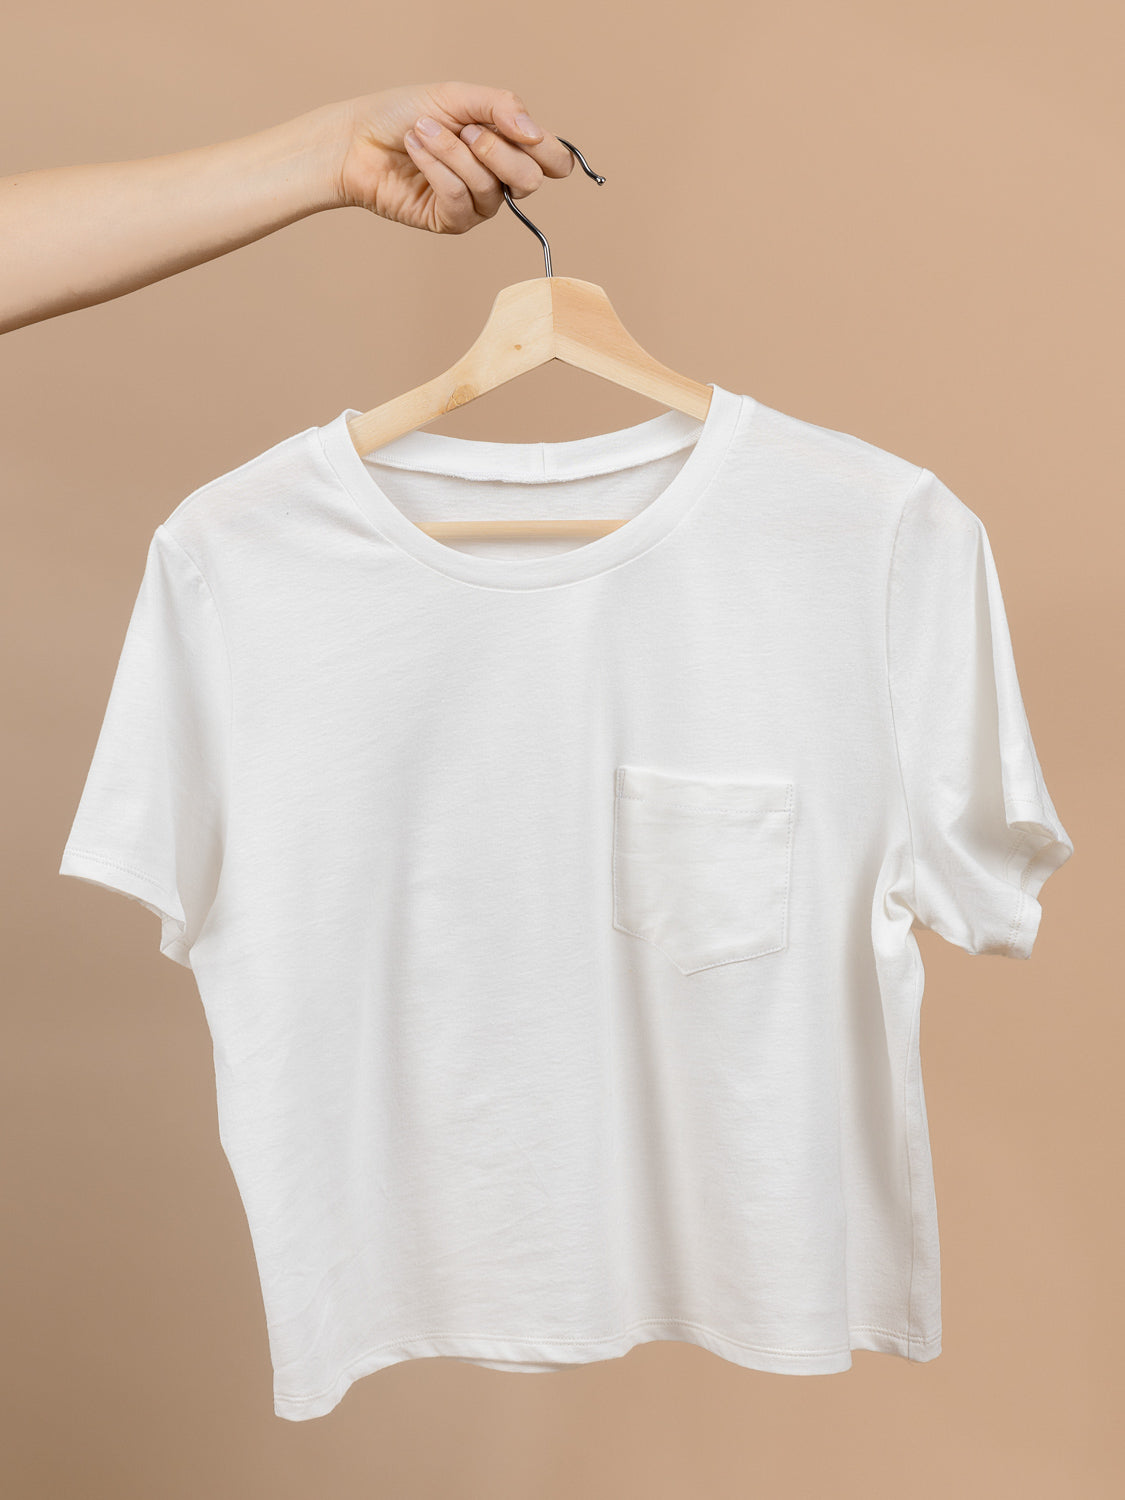 Cotton jersey T-shirt in off white